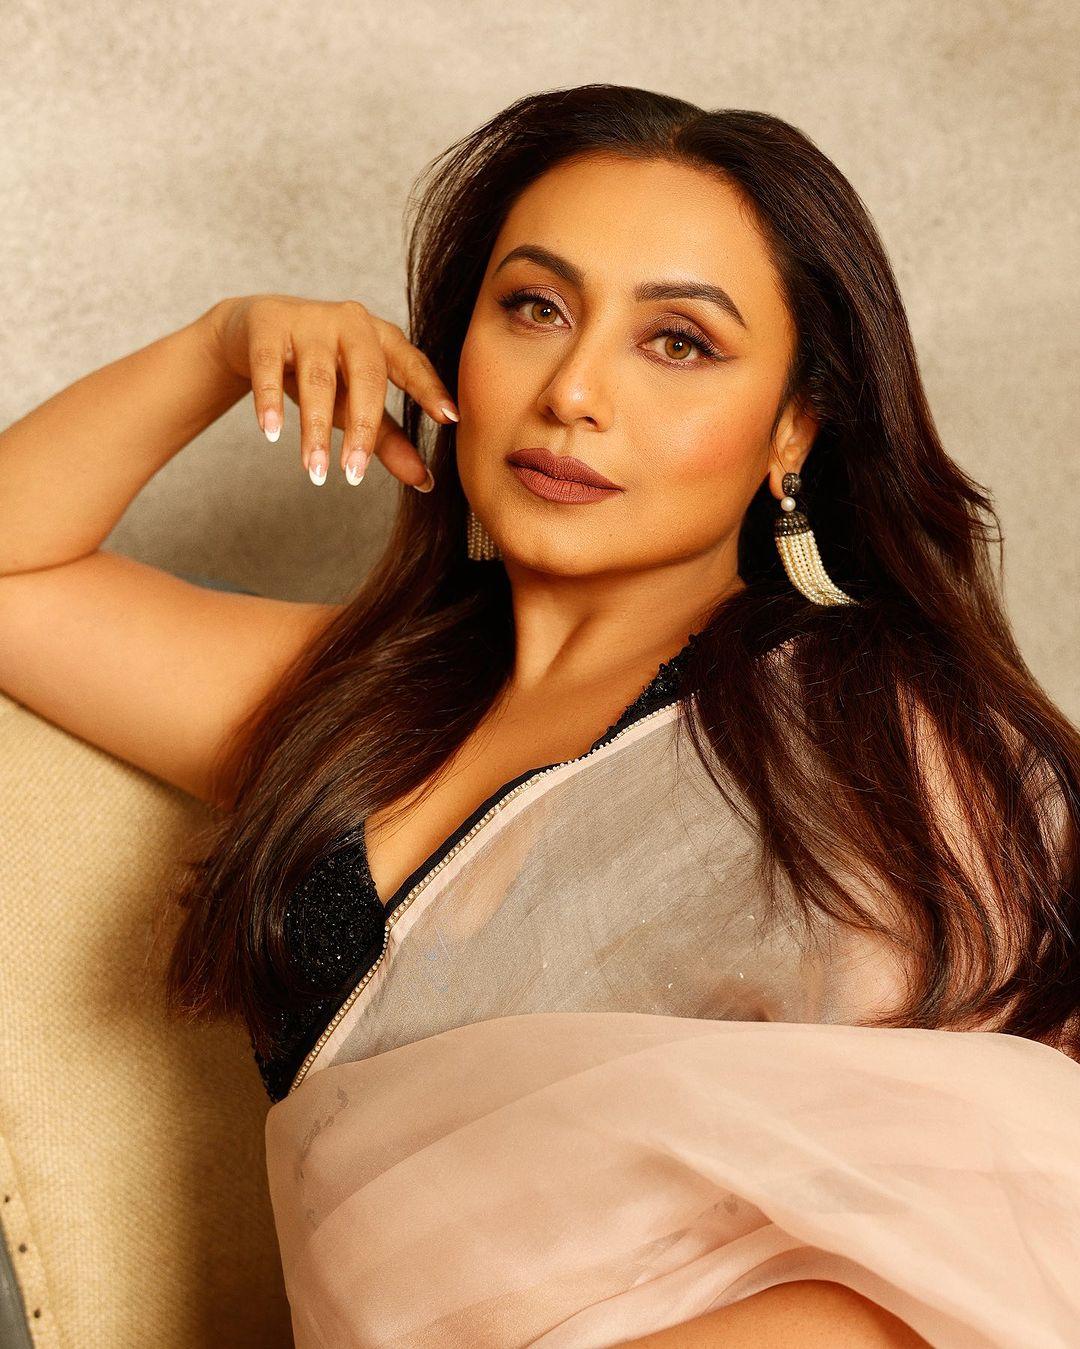 Post marriage and motherhood, Rani has taken it slow in filmdom, choosing scripts that did justice to her talents